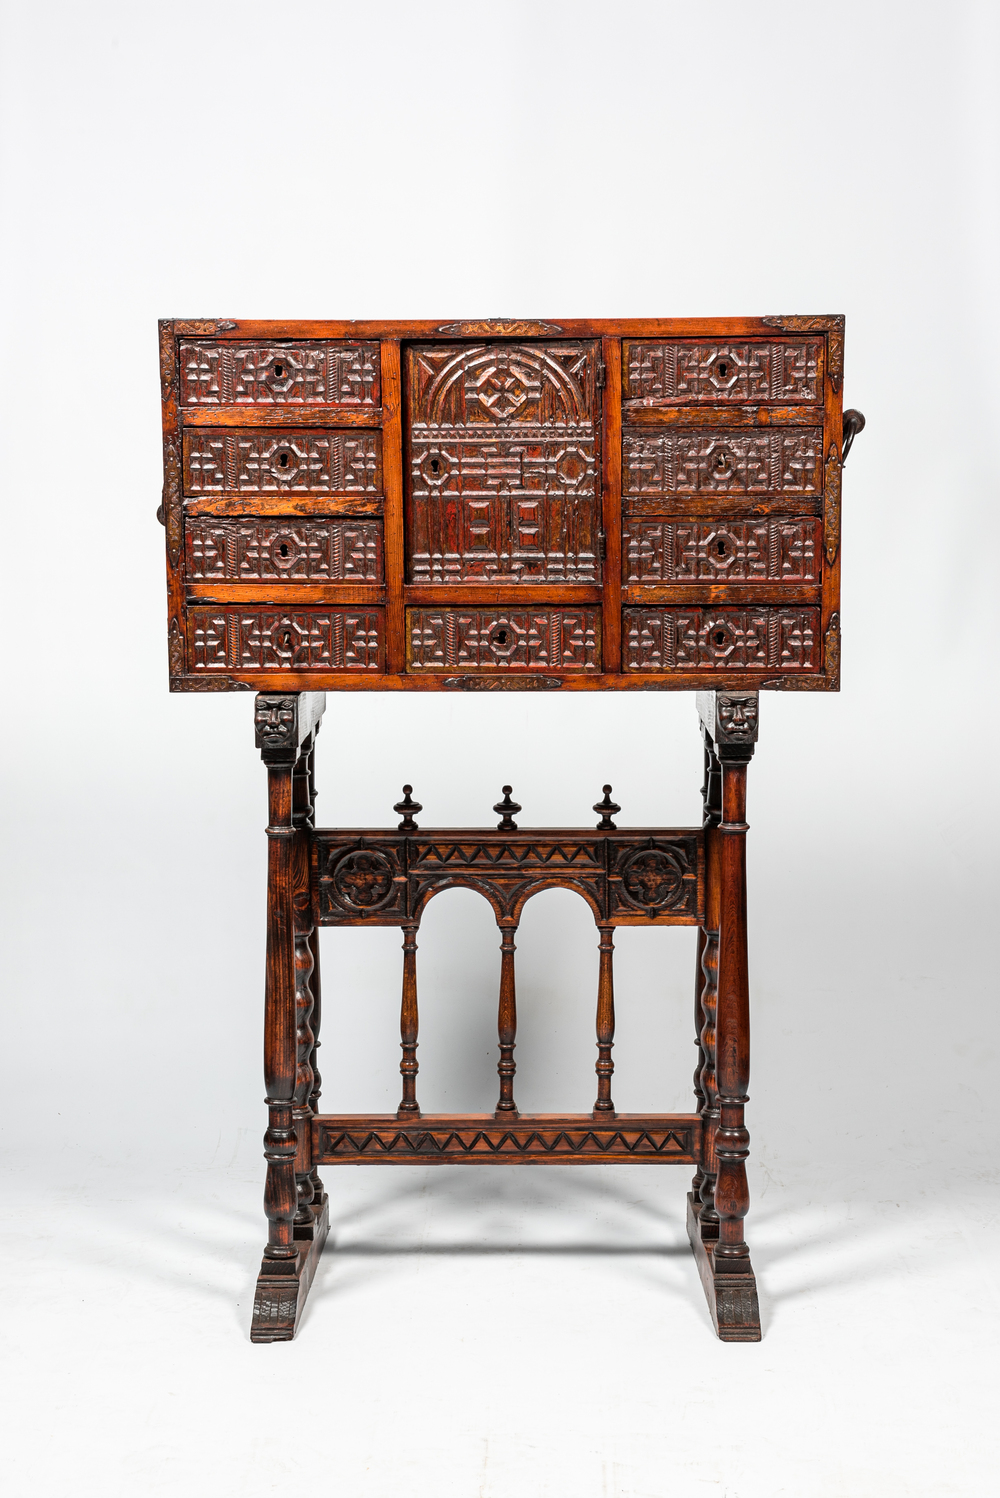 A Spanish wooden 16th-C. style 'bargue&ntilde;o' cabinet on foot, 19th C.